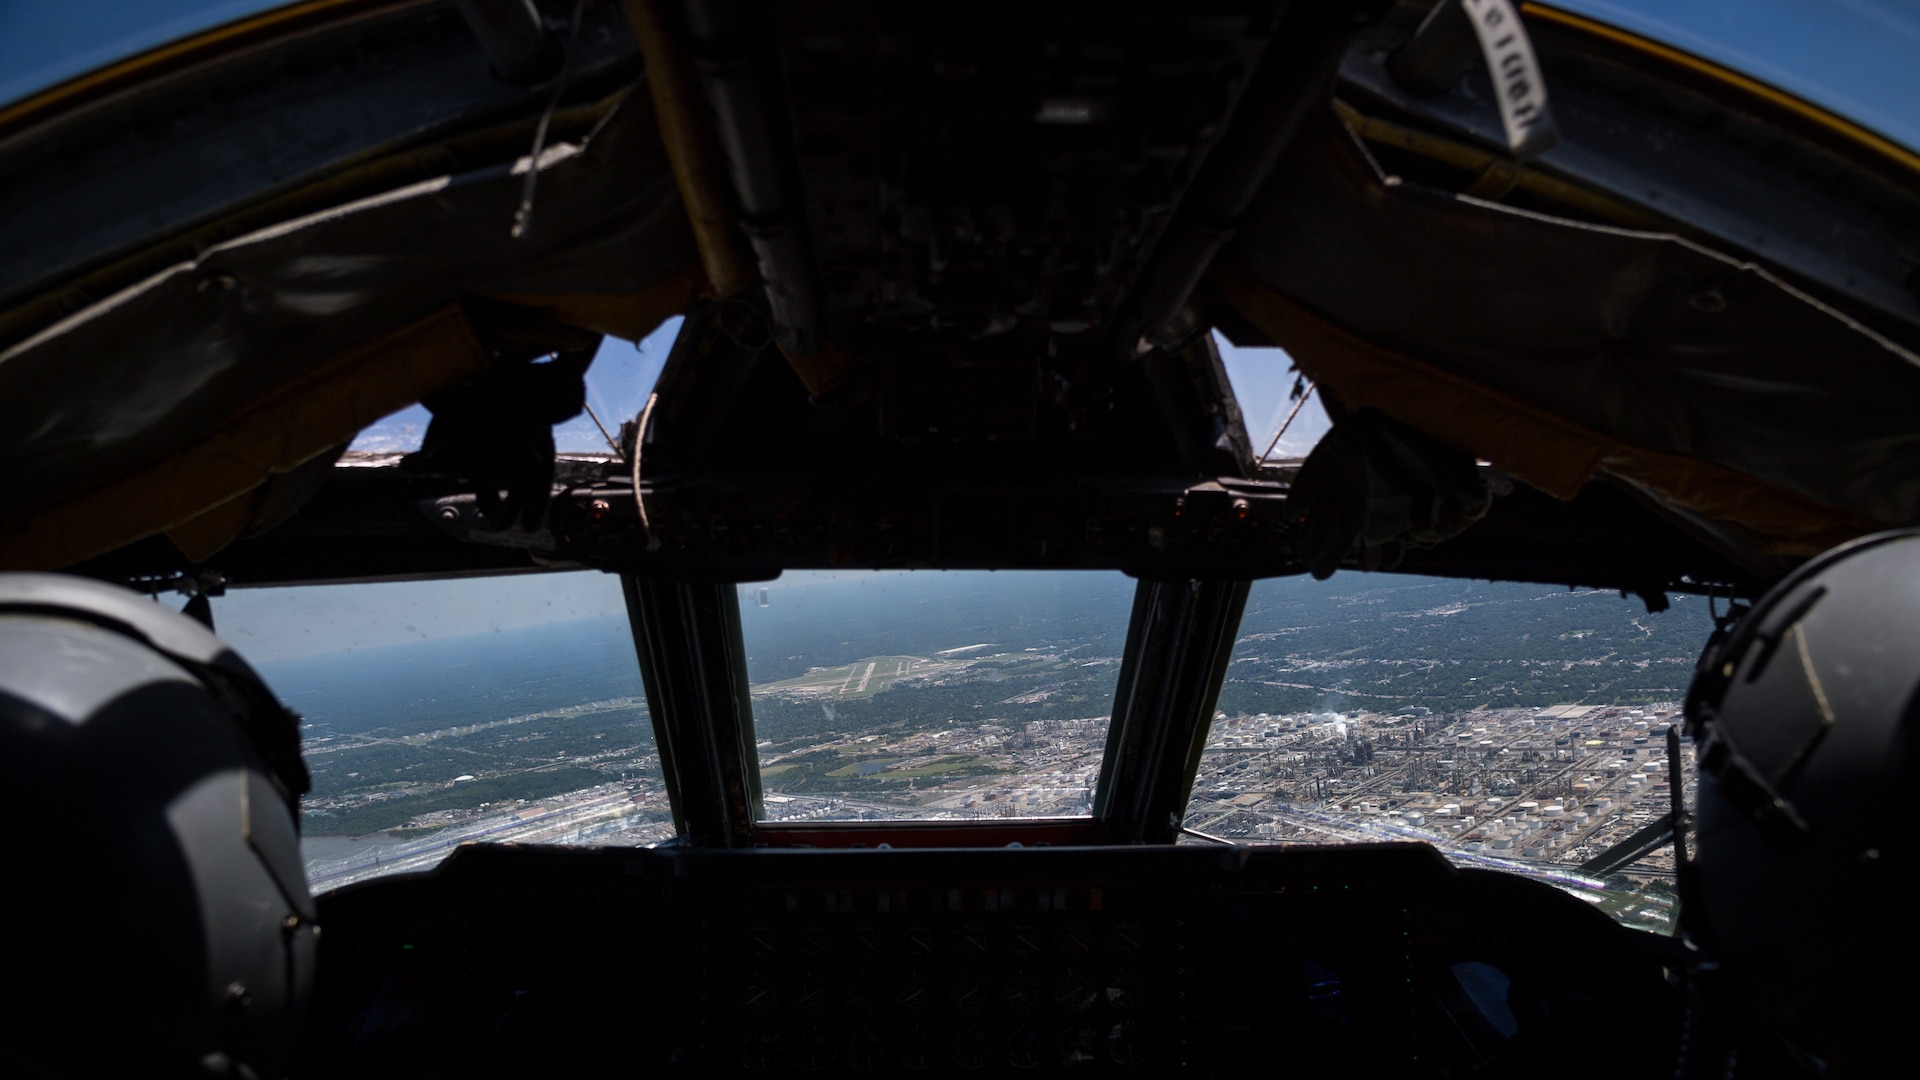 Lt. Col. Michael Green, 343rd Bomb Squadron commander, and Lt. Col. Ryan Decker, 343rd BS director of operations, guide a B-52 Stratofortress over the Louisiana state capitol building in Baton Rouge, May 1, 2020.